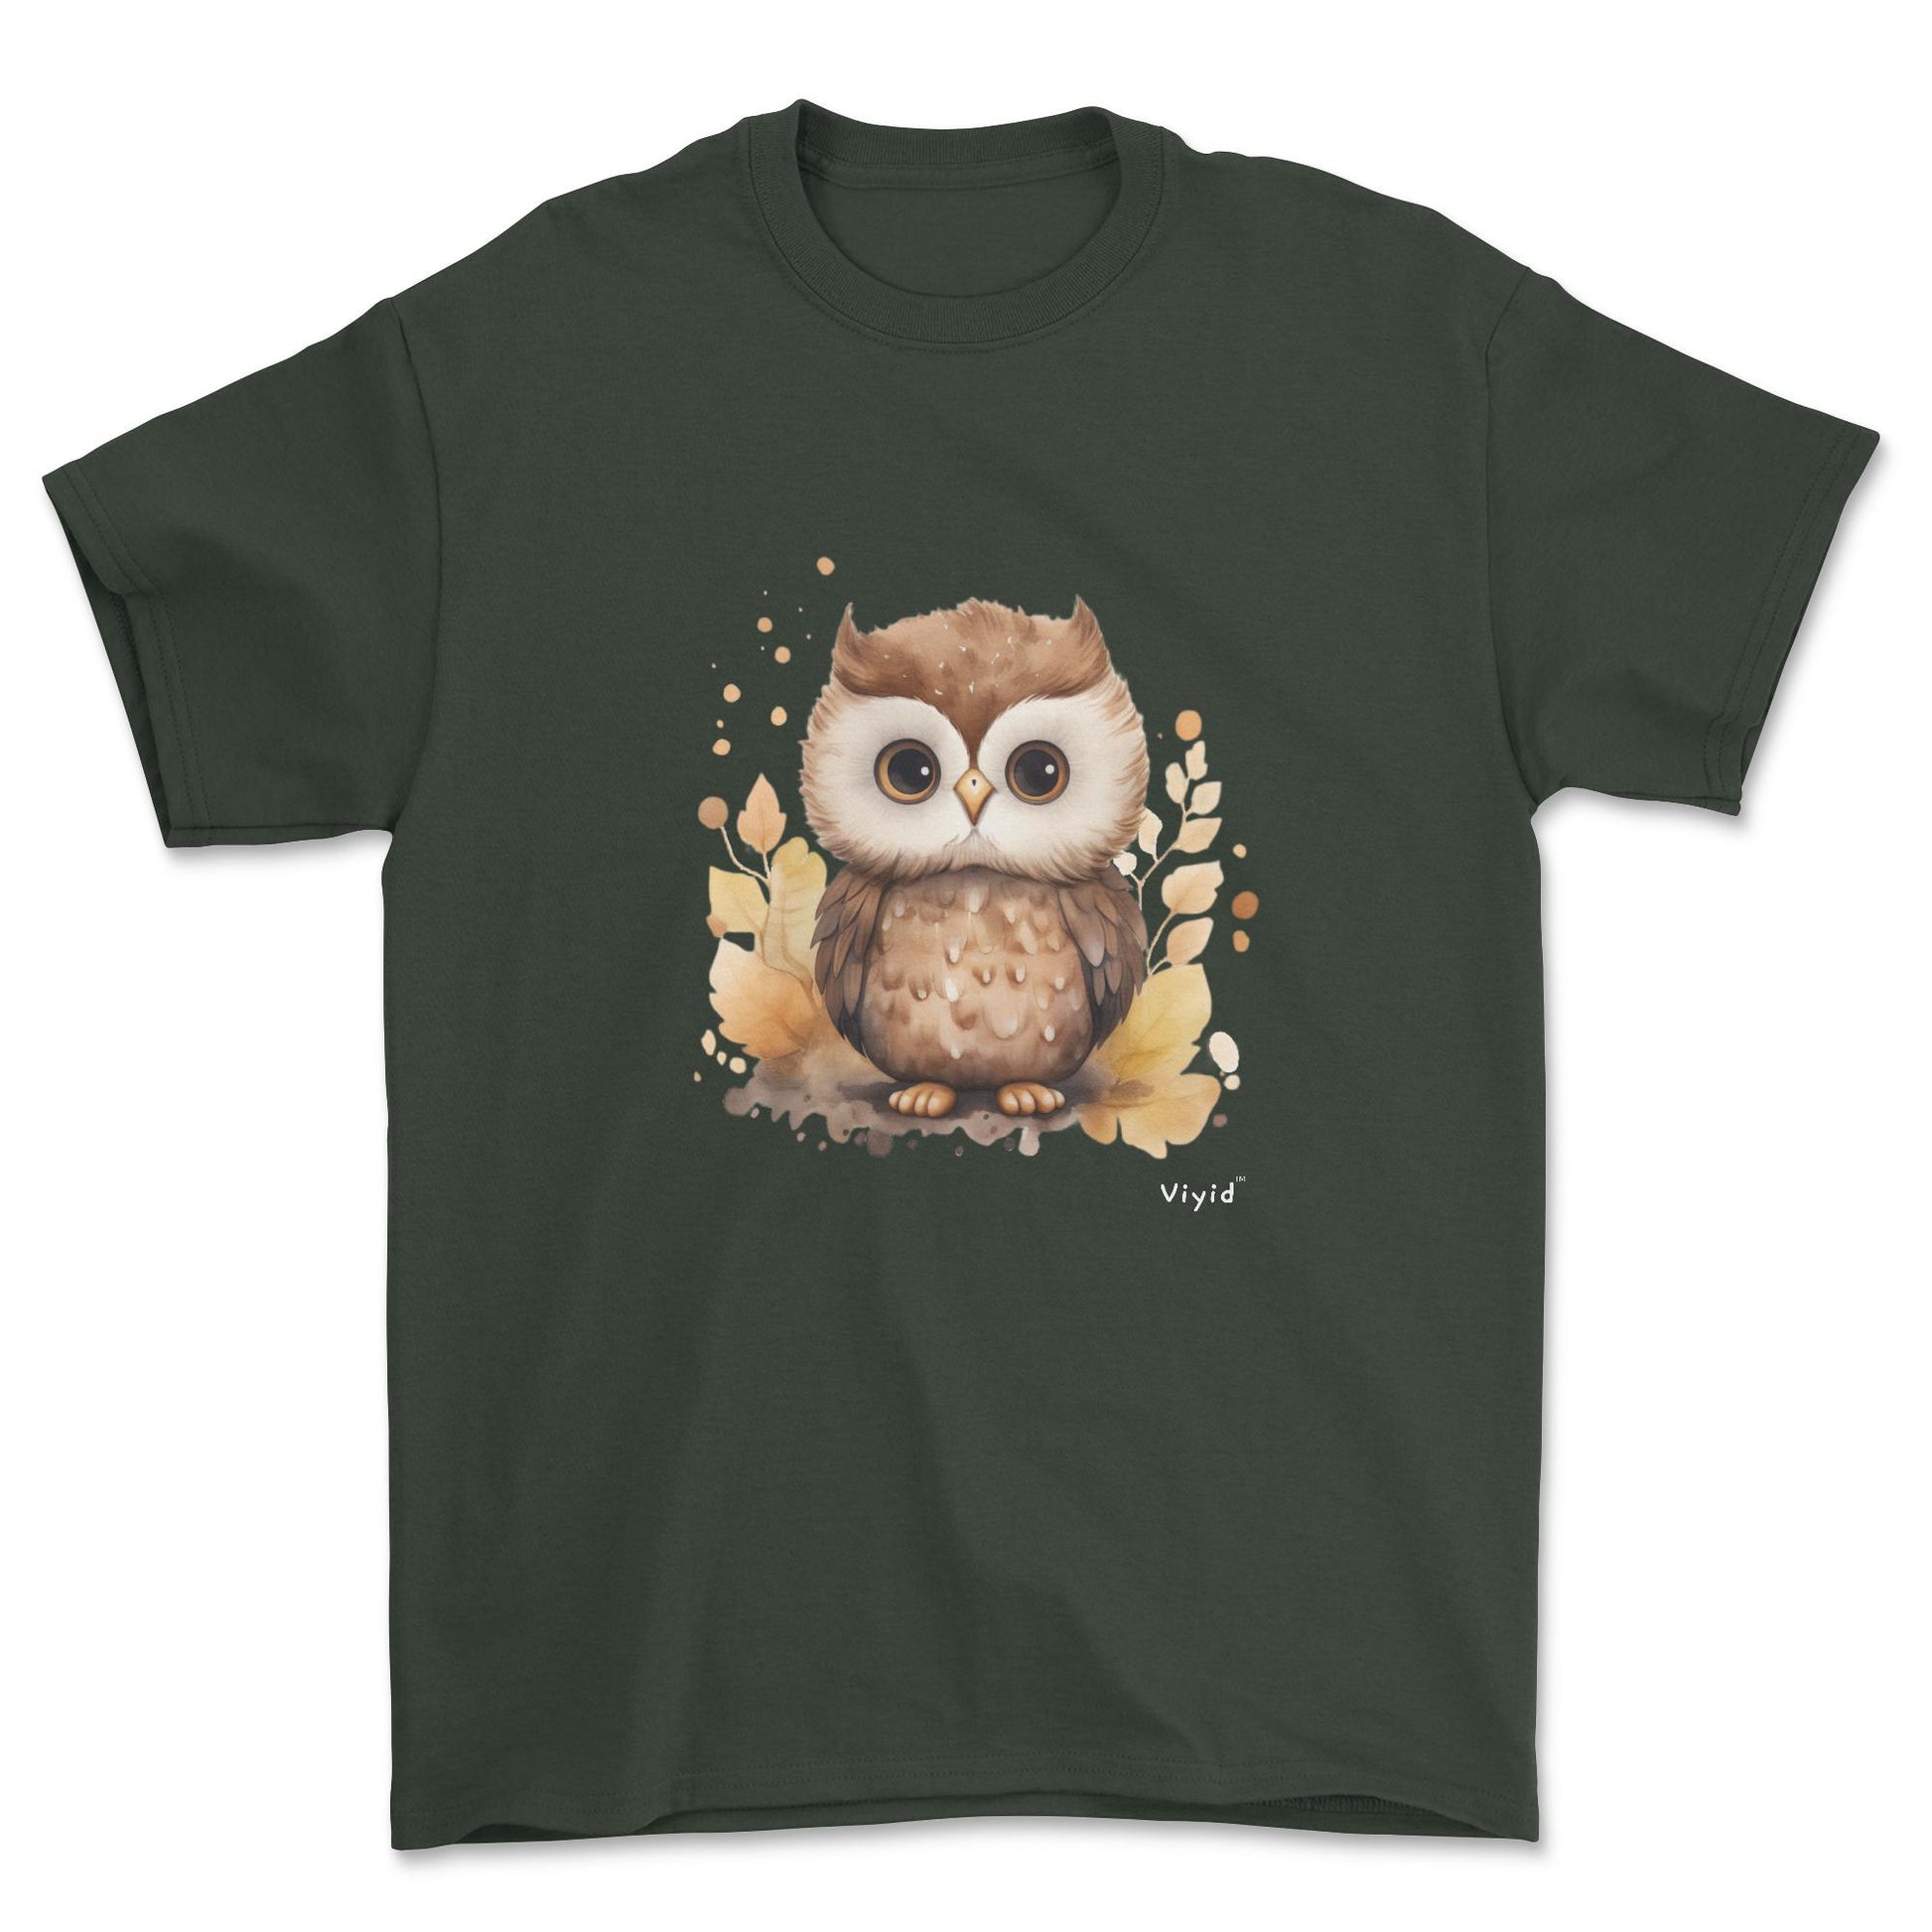 nocturnal owl youth t-shirt forest green